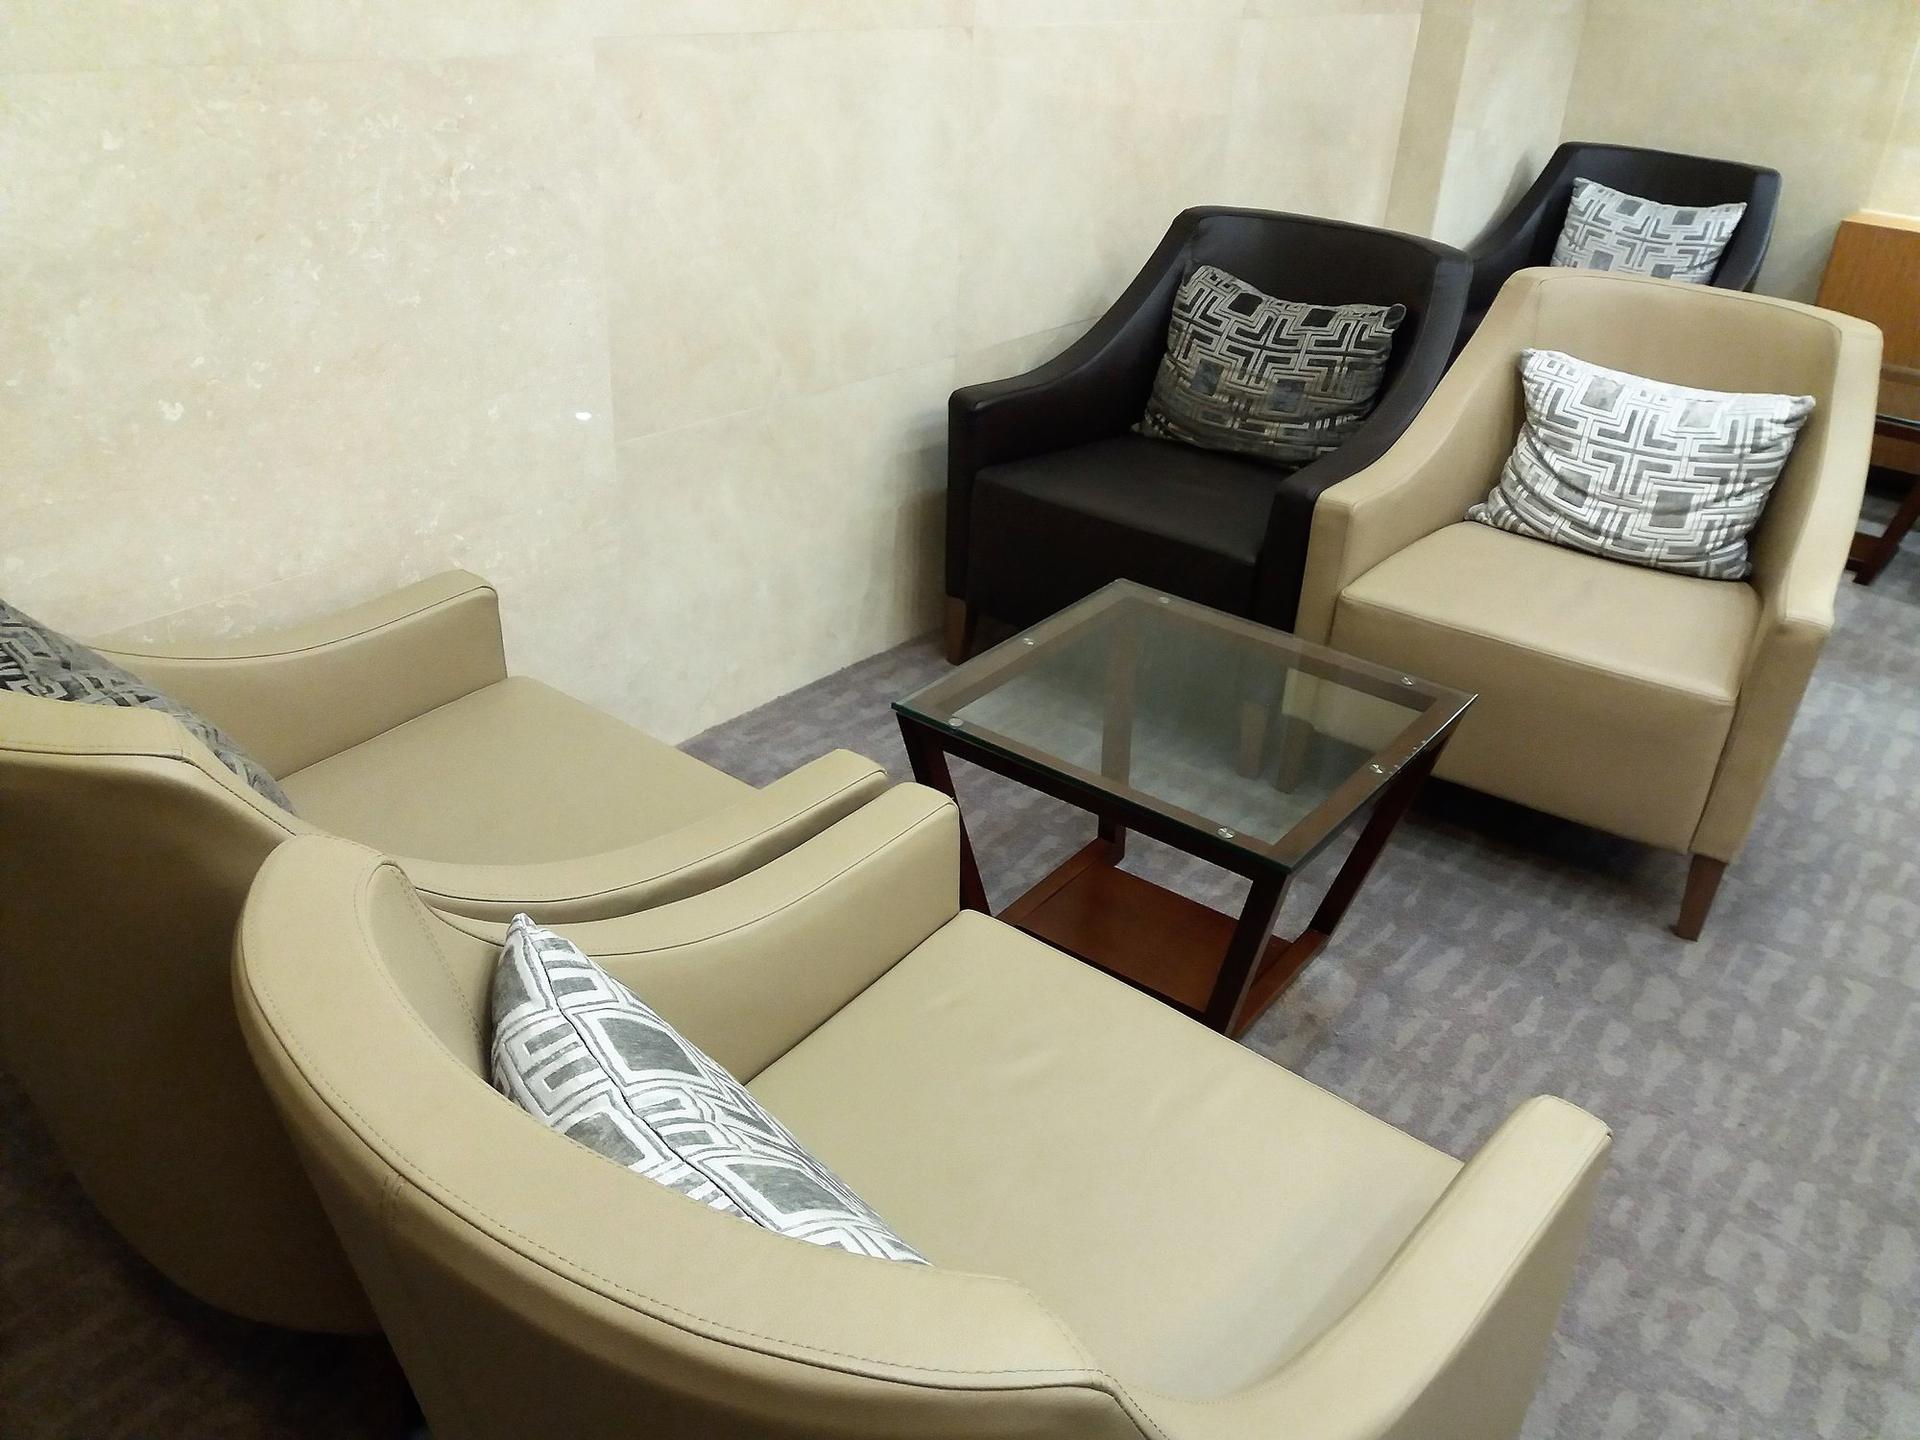 Air China First & Business Class Lounge image 8 of 12